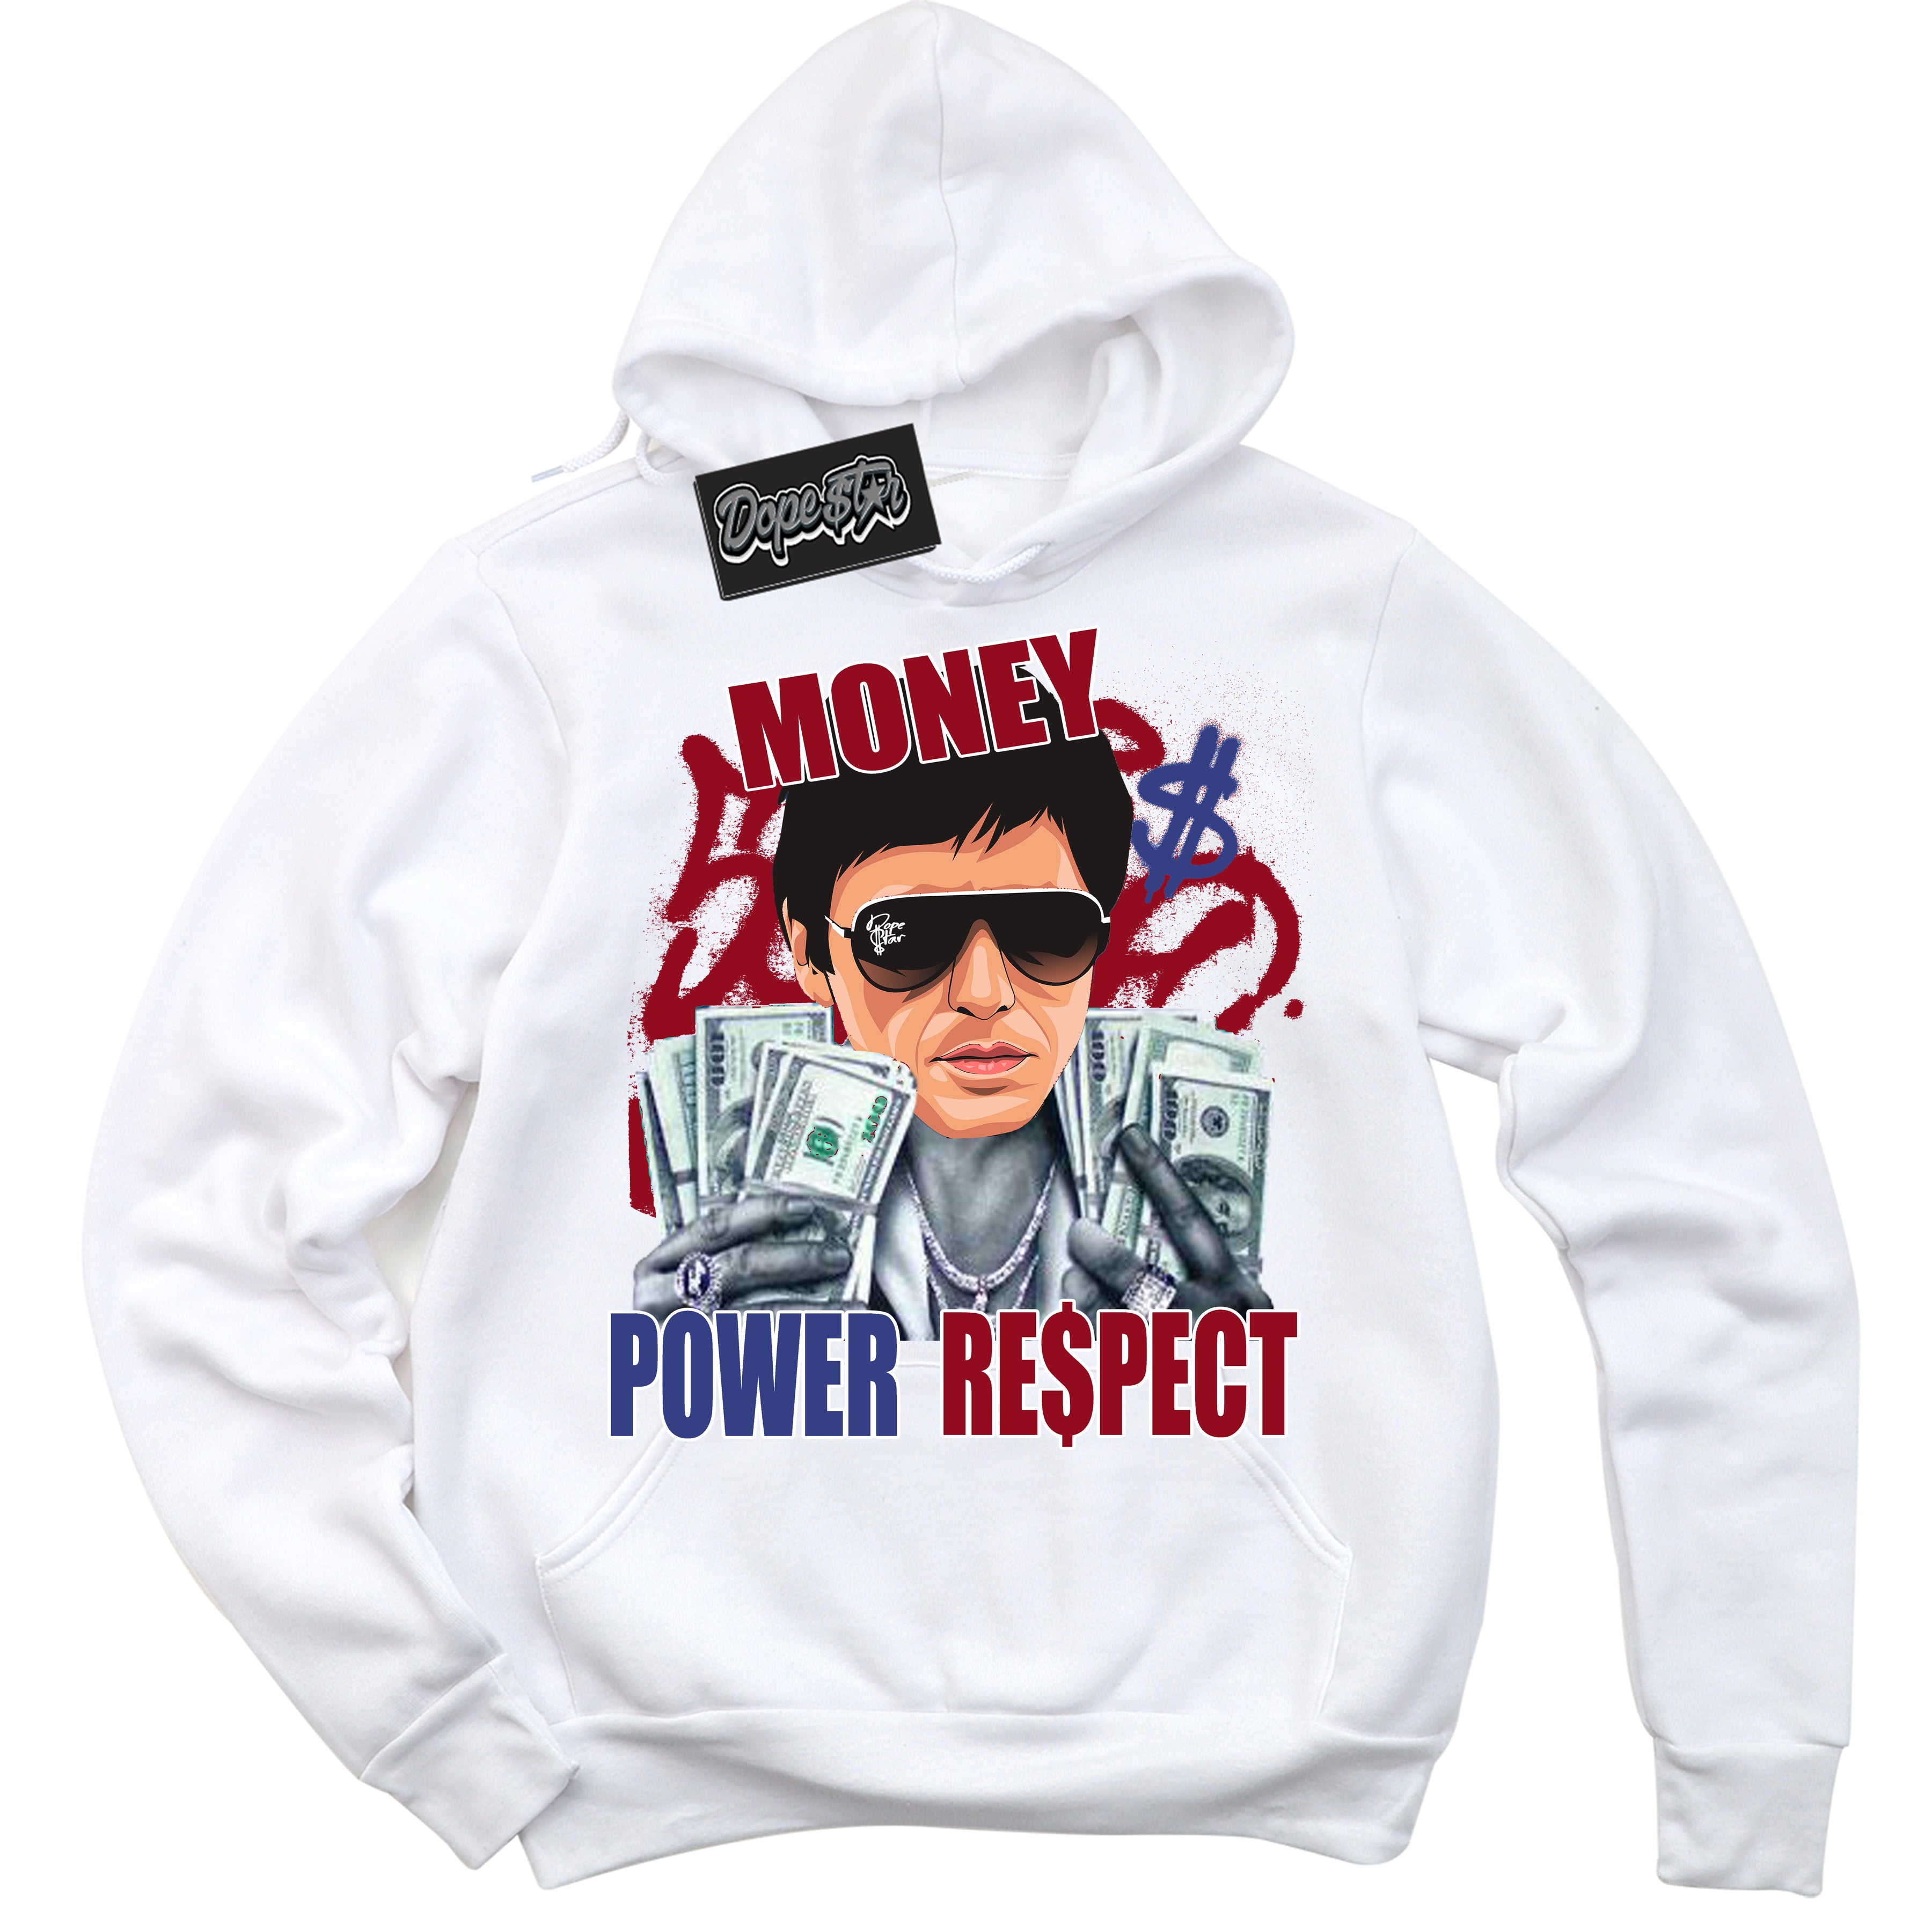 Cool White Hoodie with “ Tony Montana ”  design that Perfectly Matches Playoffs 8s Sneakers.